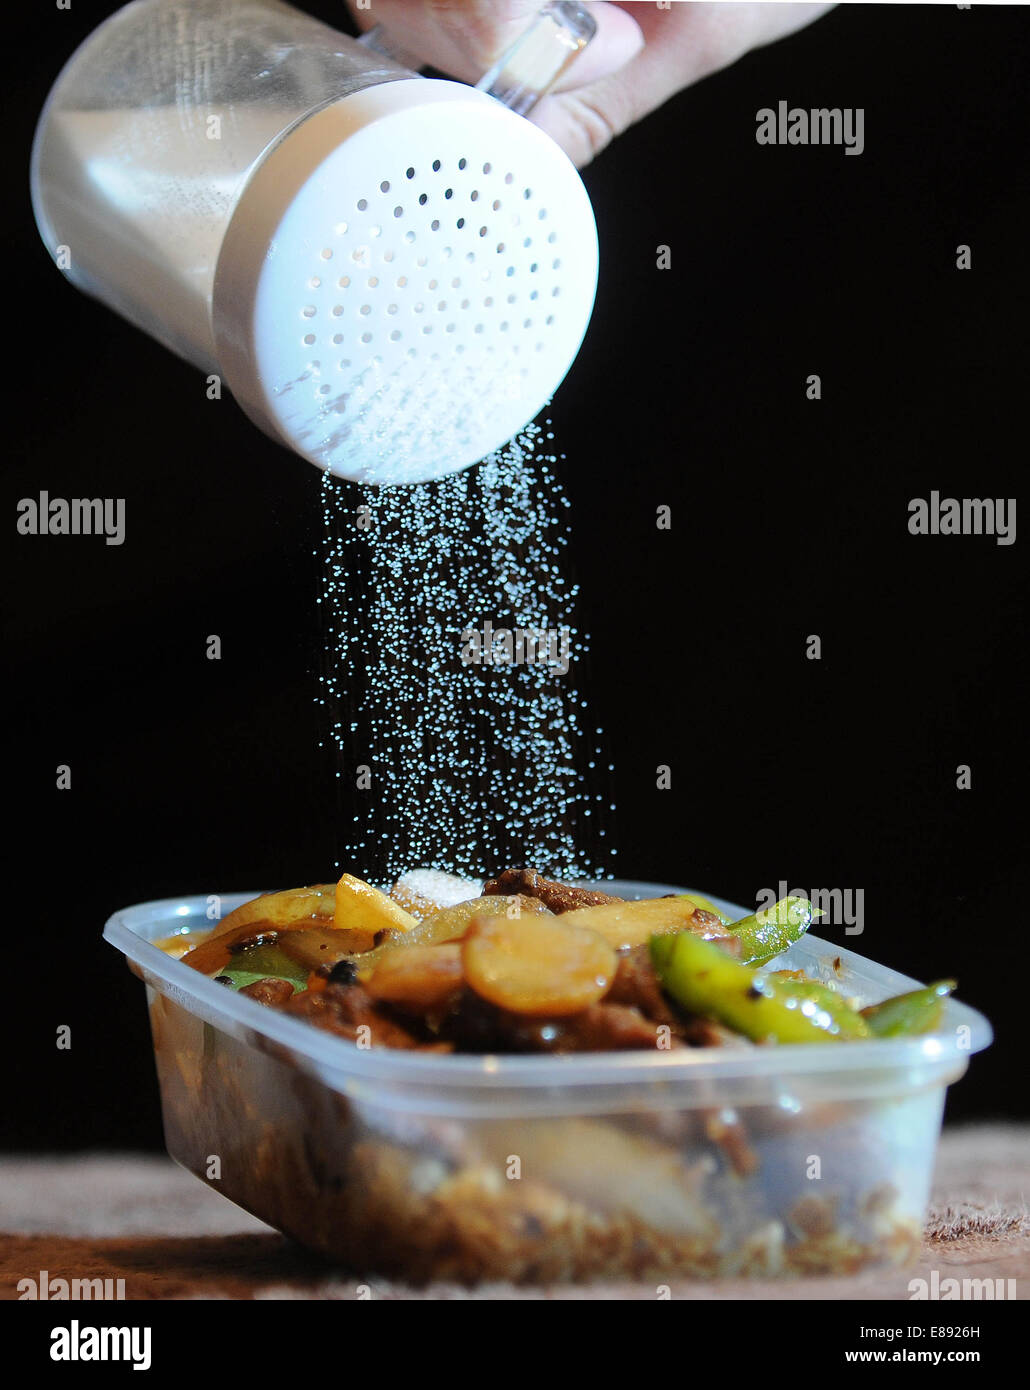 A salty takeaway chinese meal with salt being poured over it. Stock Photo